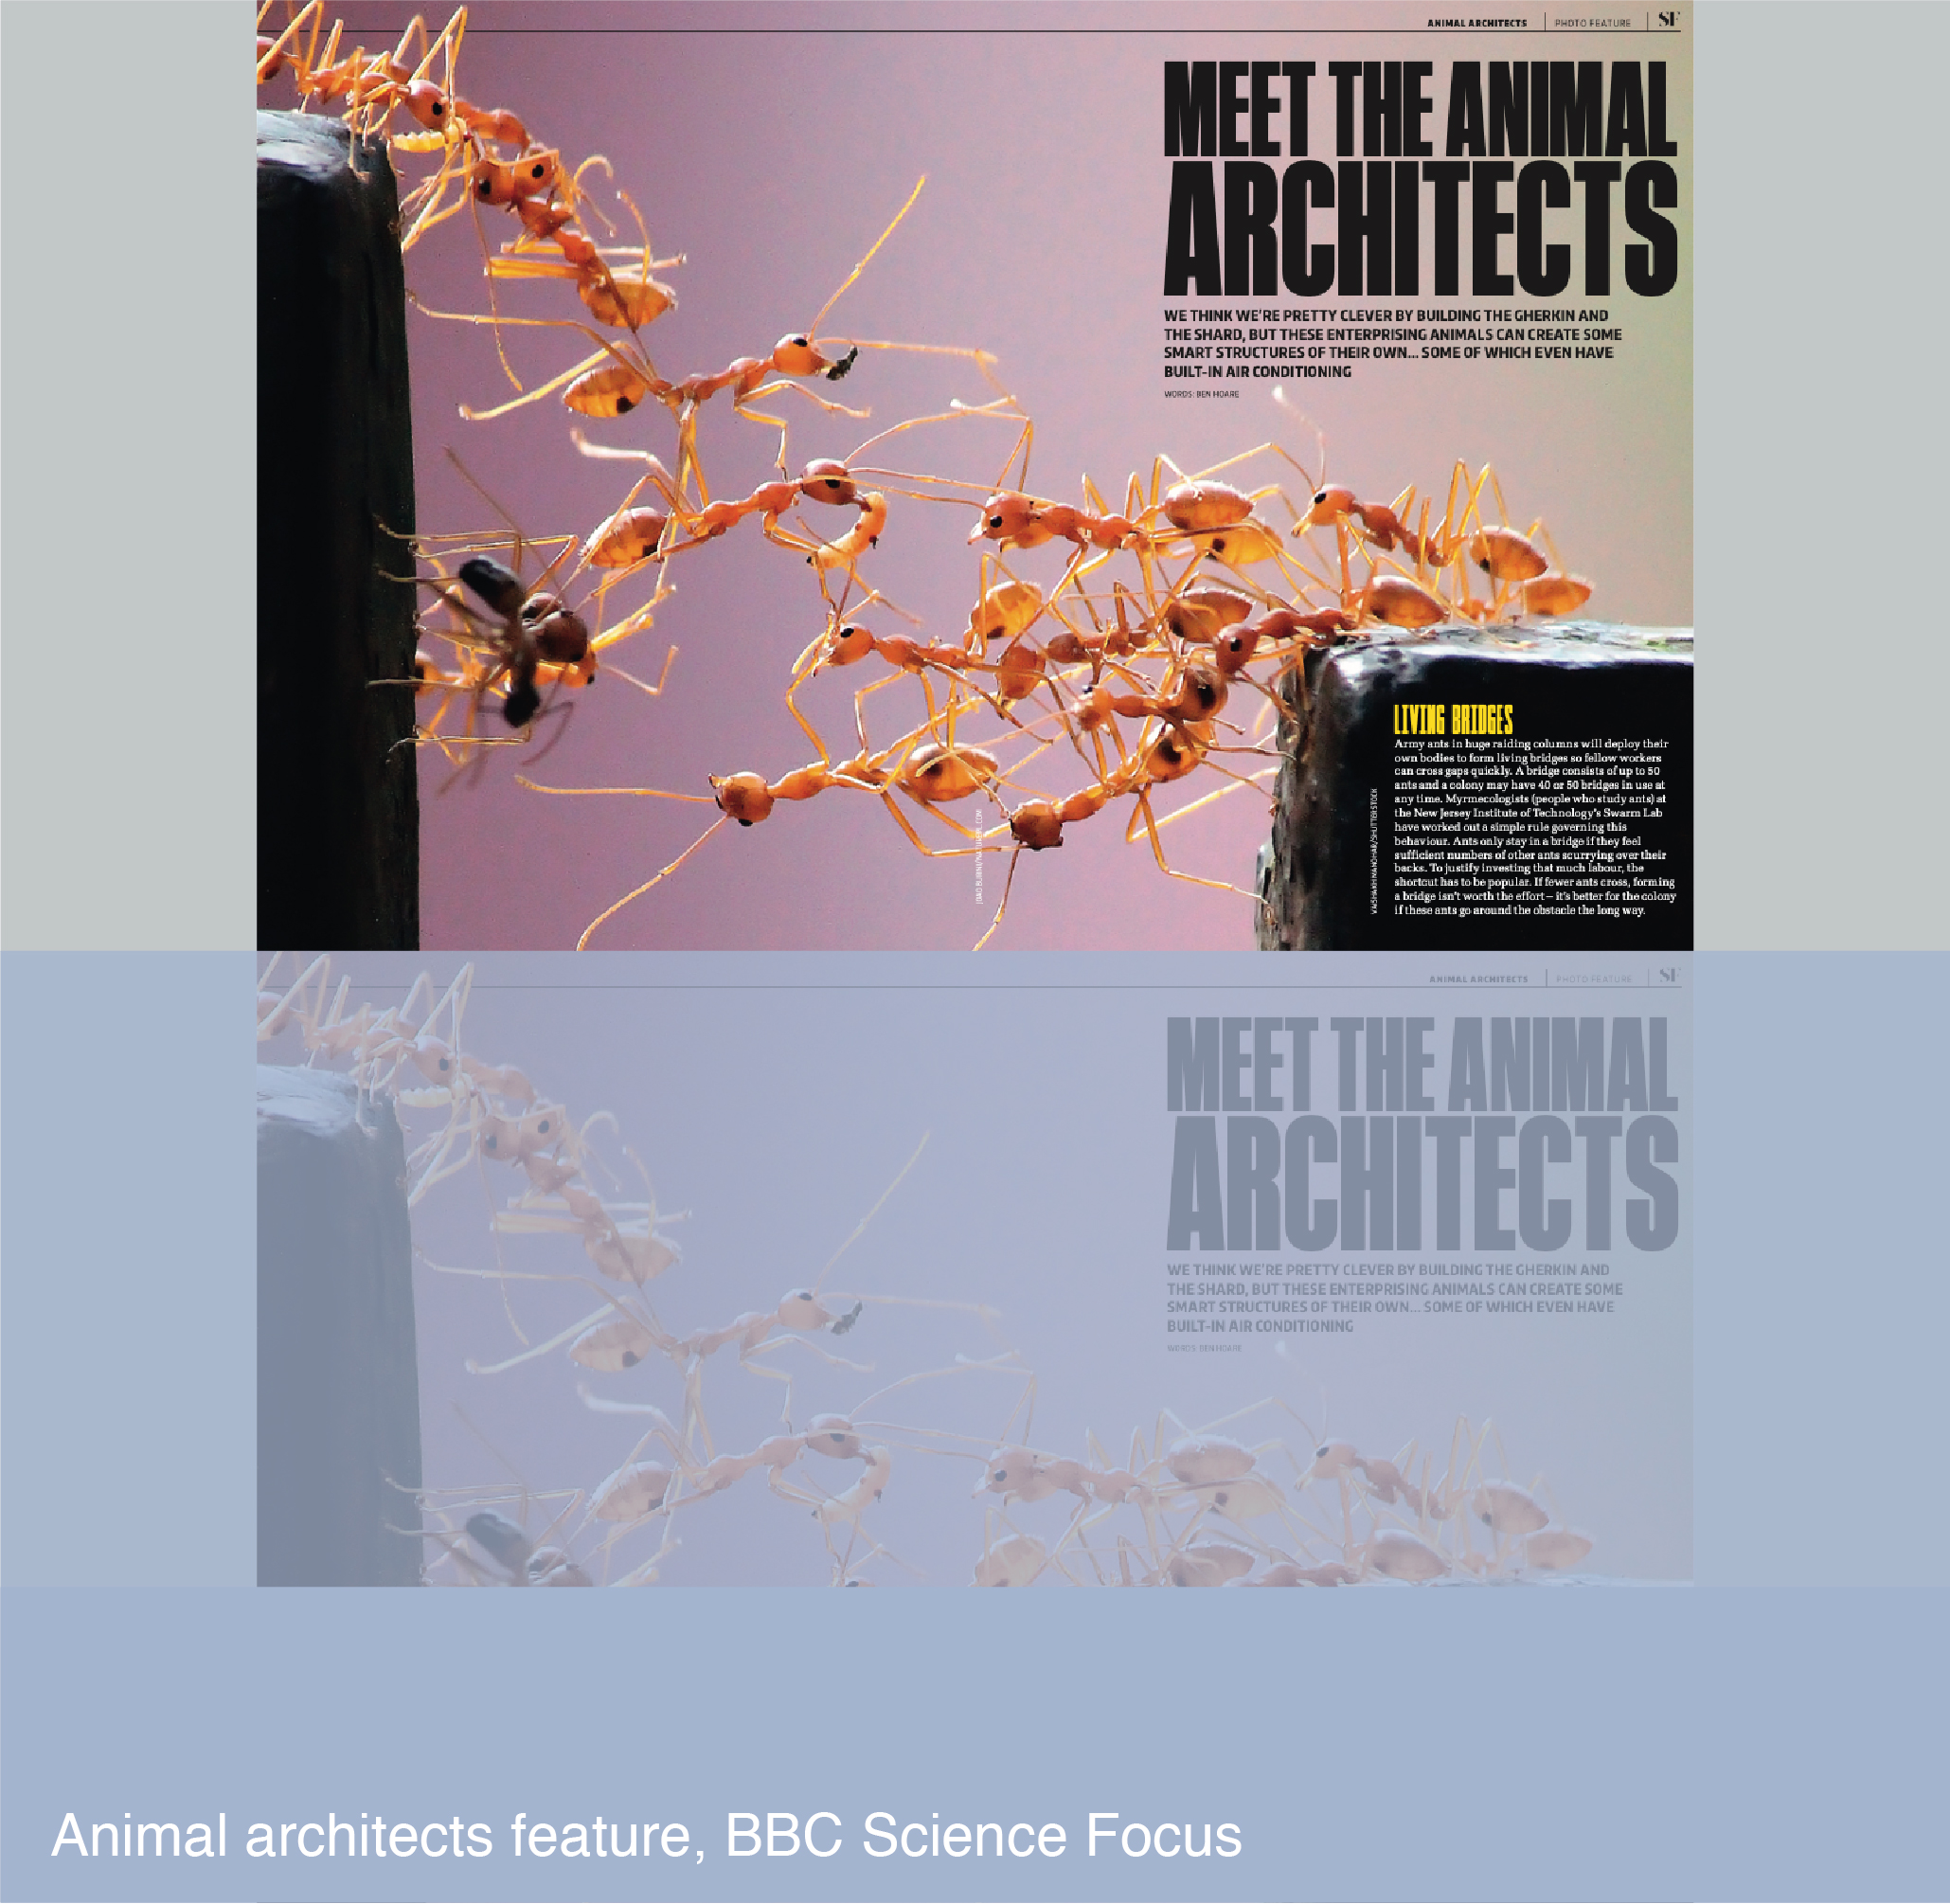 Animal architects feature for BBC Science Focus